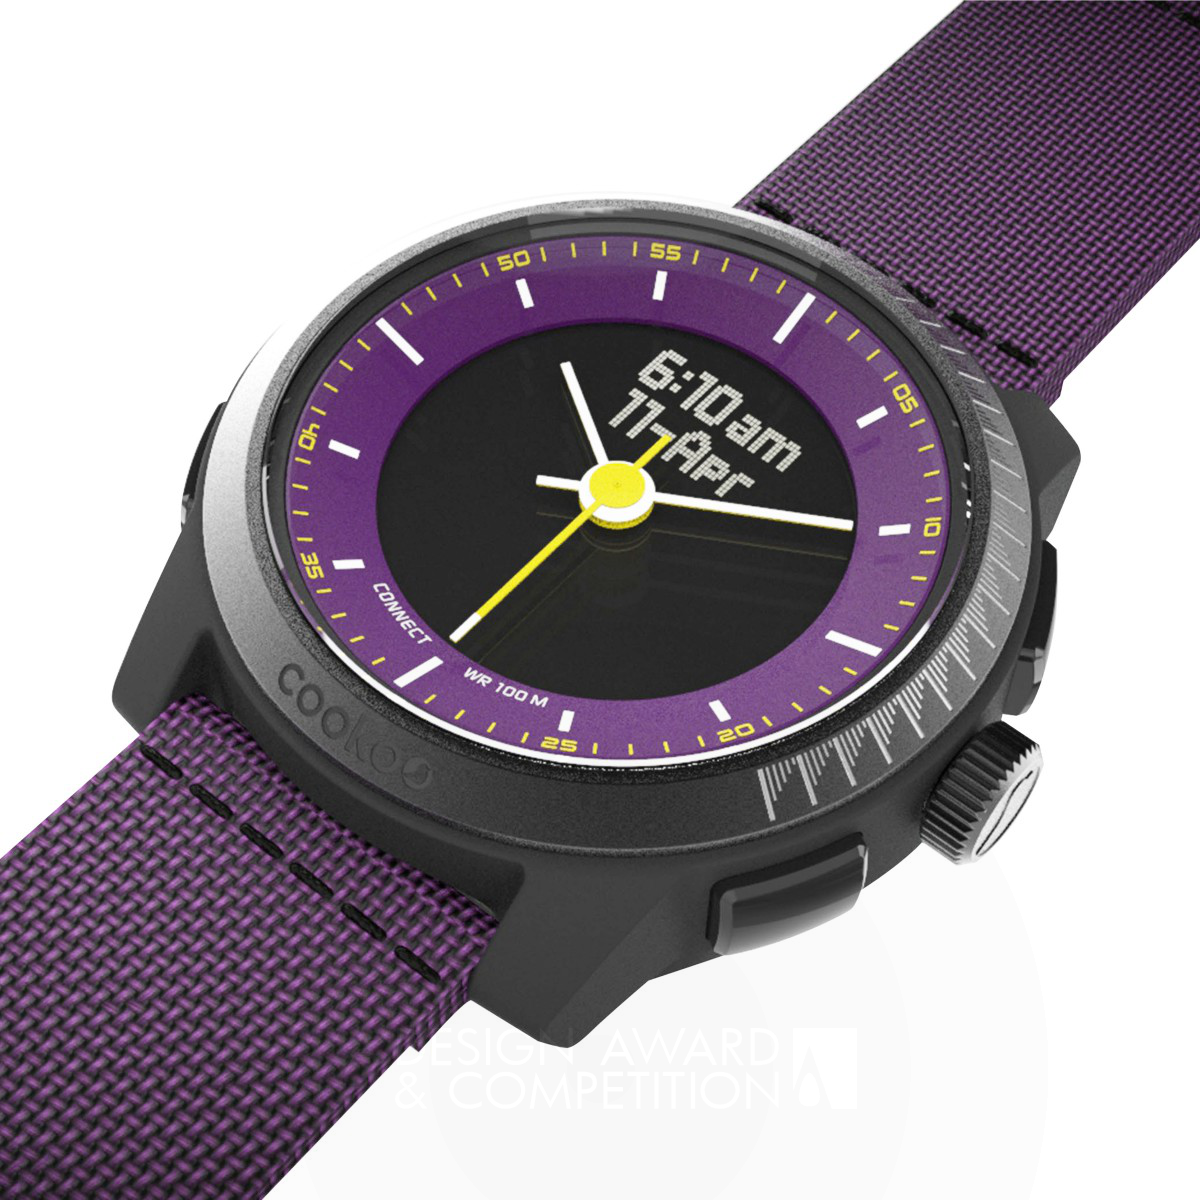 Good Bluetooth Connected Watch Design